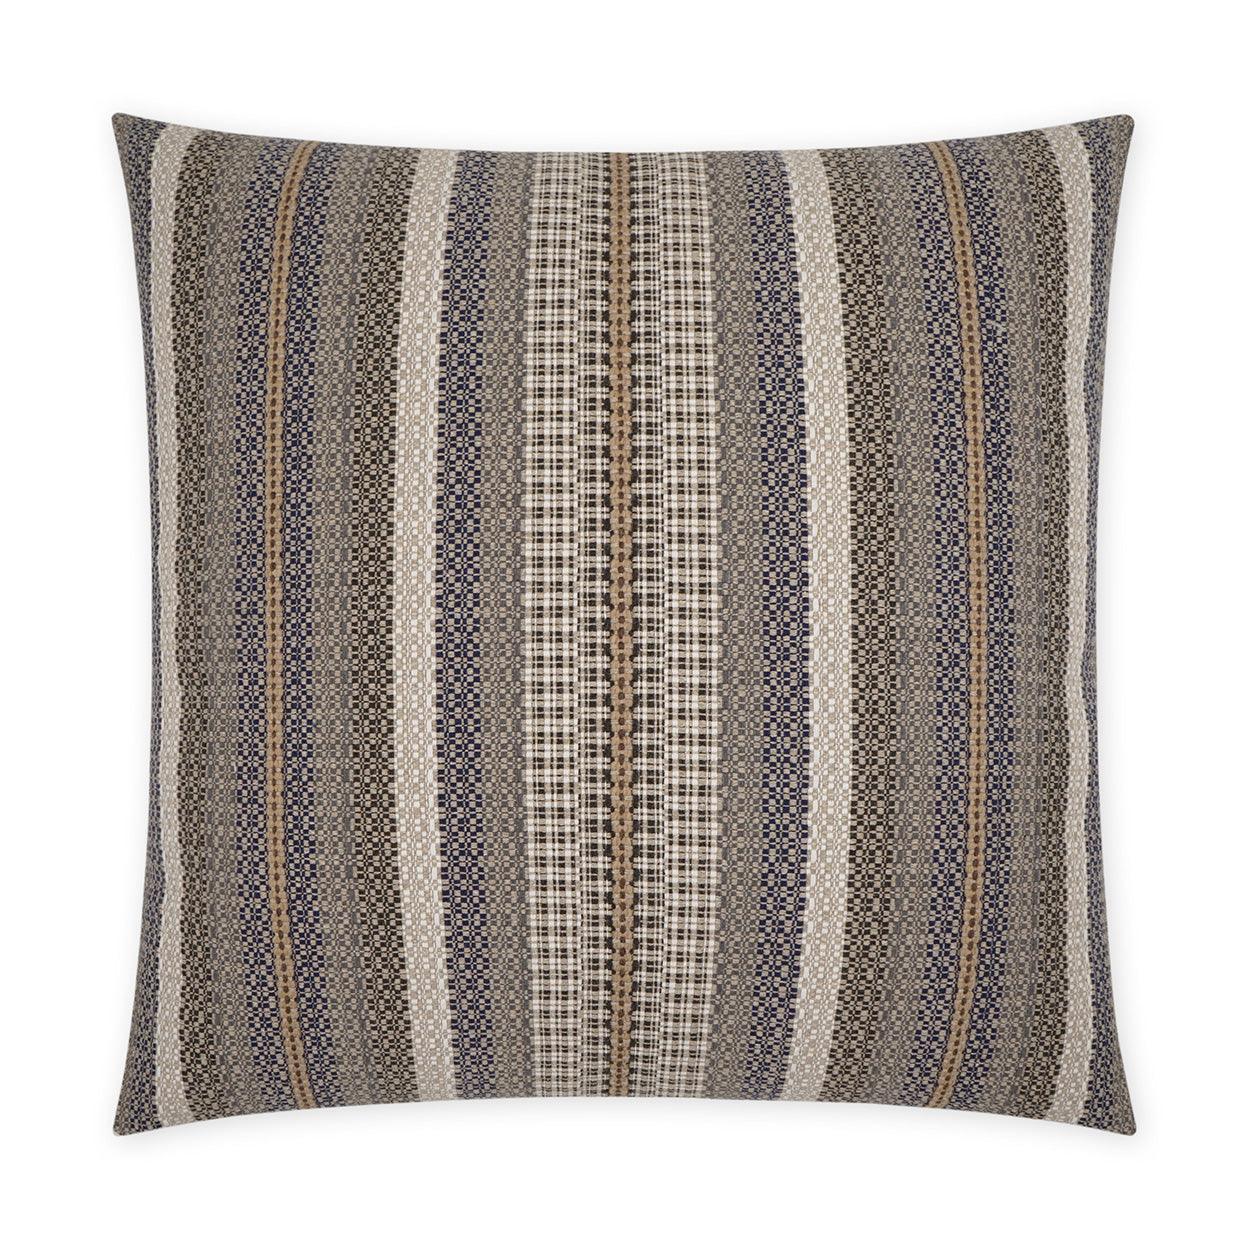 Lalam Stripes Blue Tan Taupe Large Throw Pillow With Insert - Uptown Sebastian